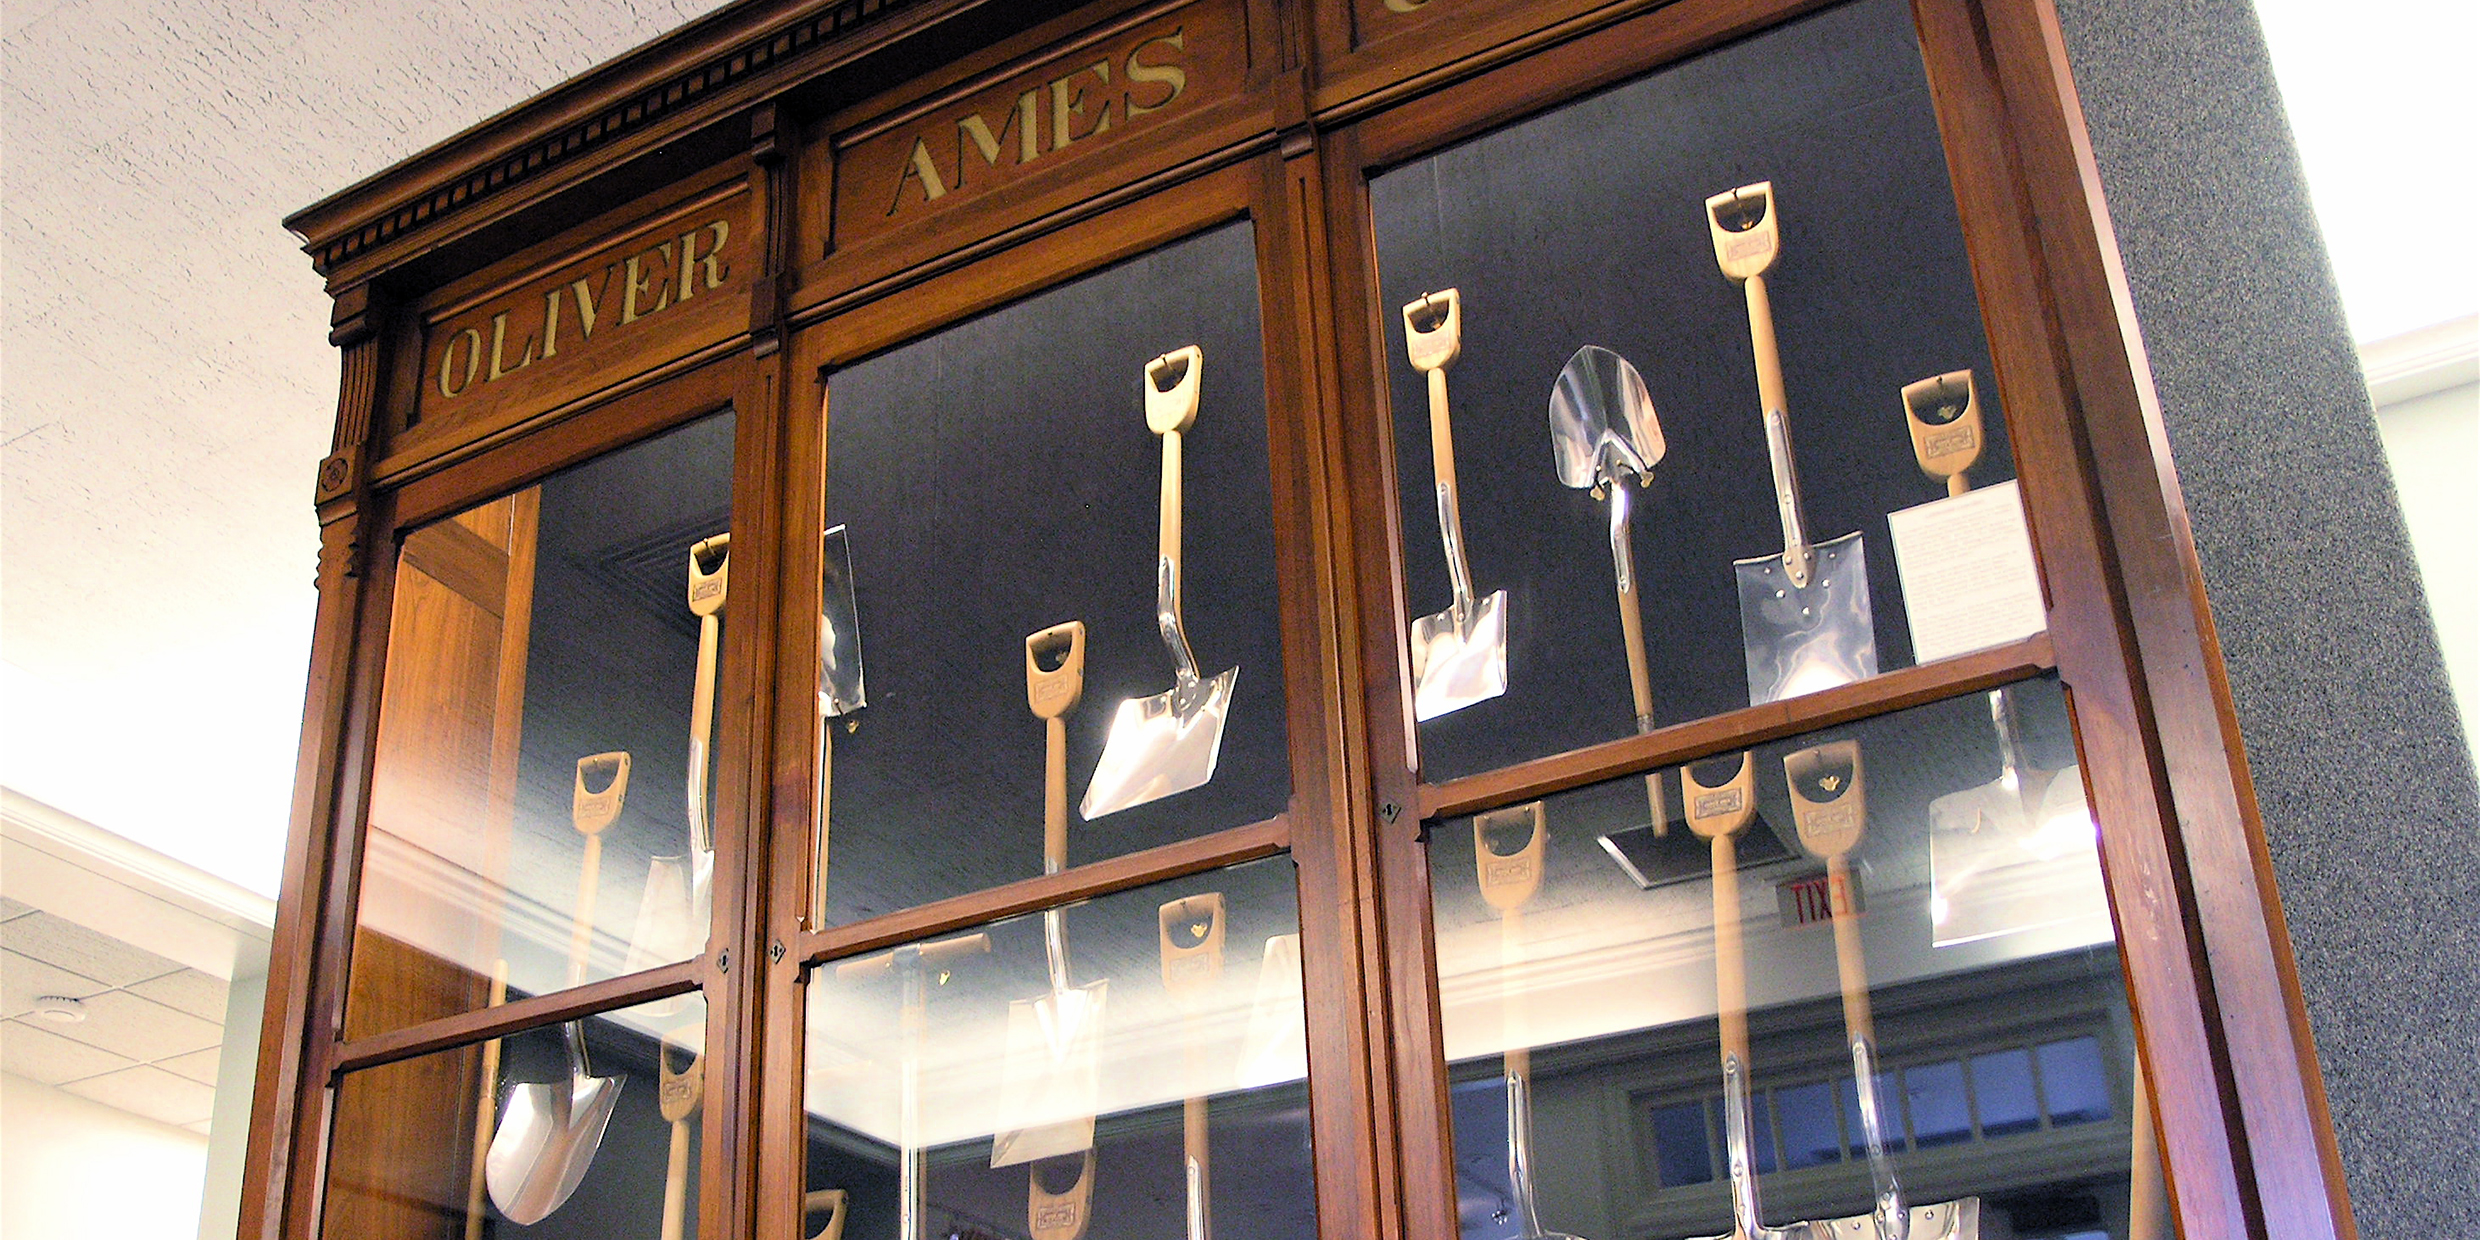 Photo of a collection of shovels inside a display cabinet